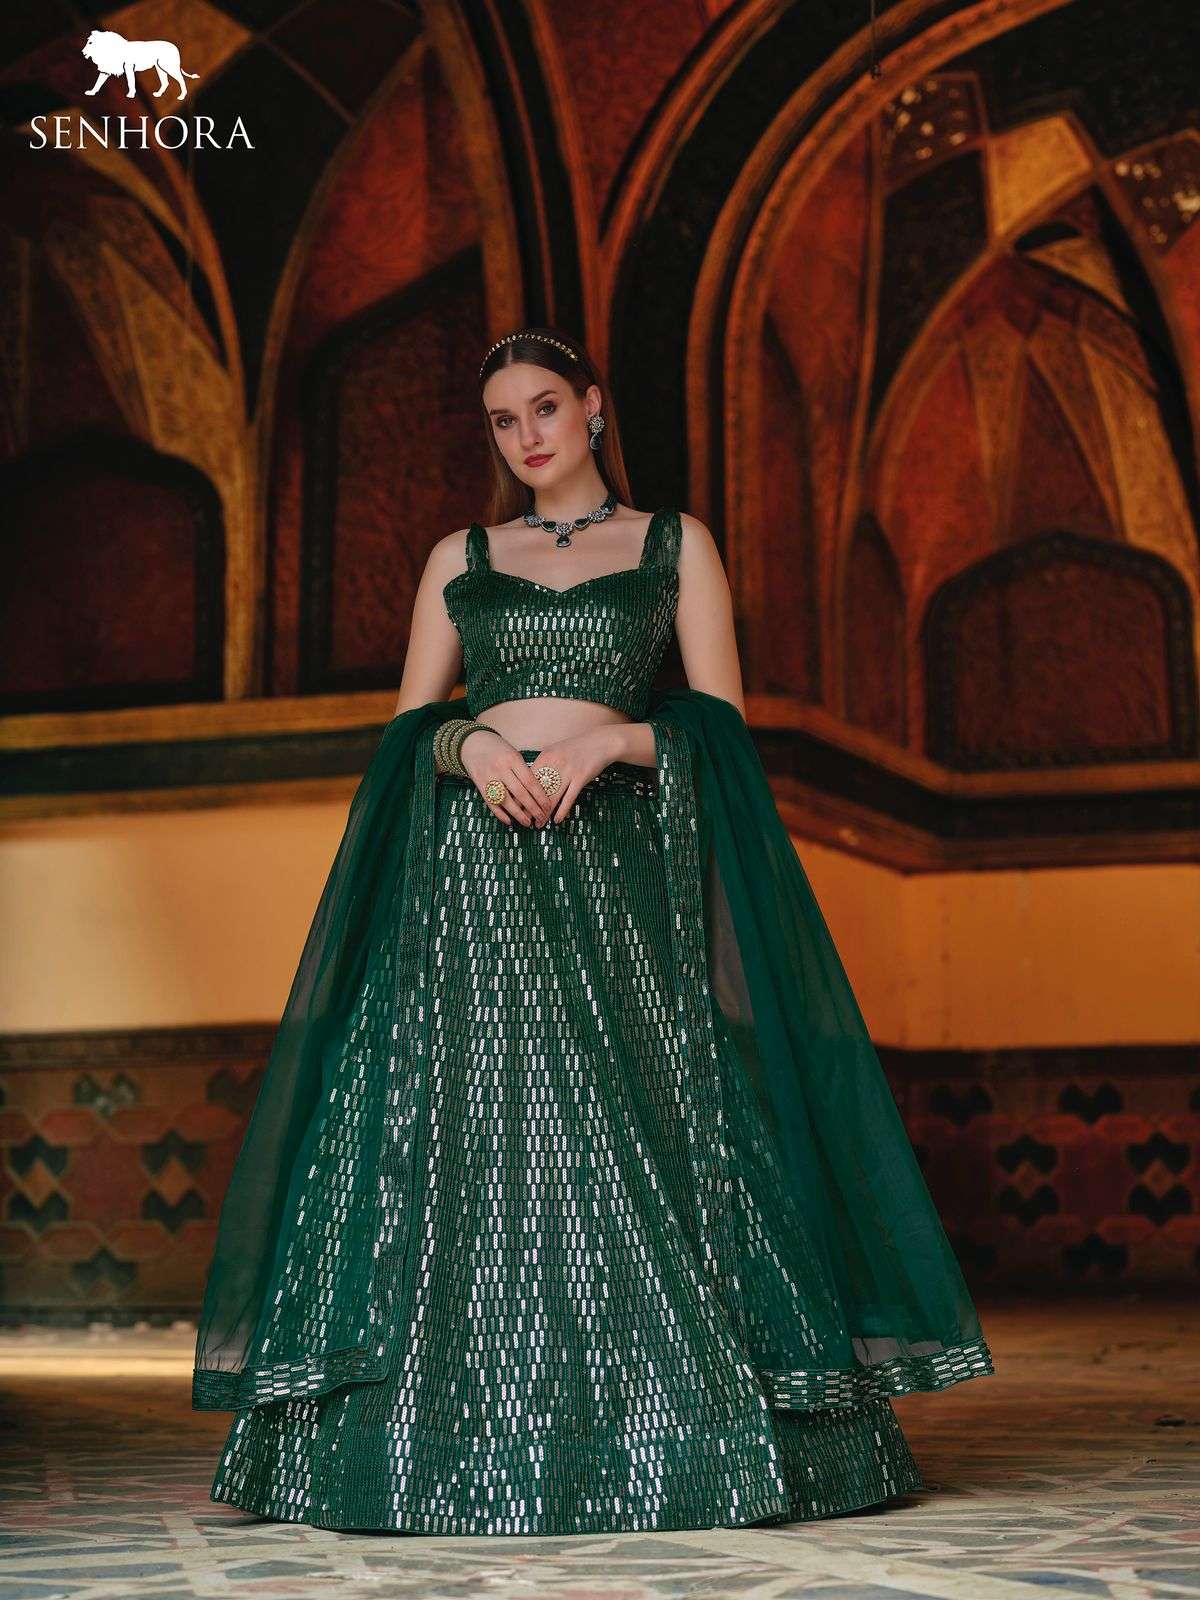 Armadio - Our beautiful client @aishbr looking classy and ethereal in our  stylish royal blue cocktail lehenga shopped from @armadiobangalore . . . .  Armadio Sadashivnagar Address : 34, Sankeys Cross Rd,